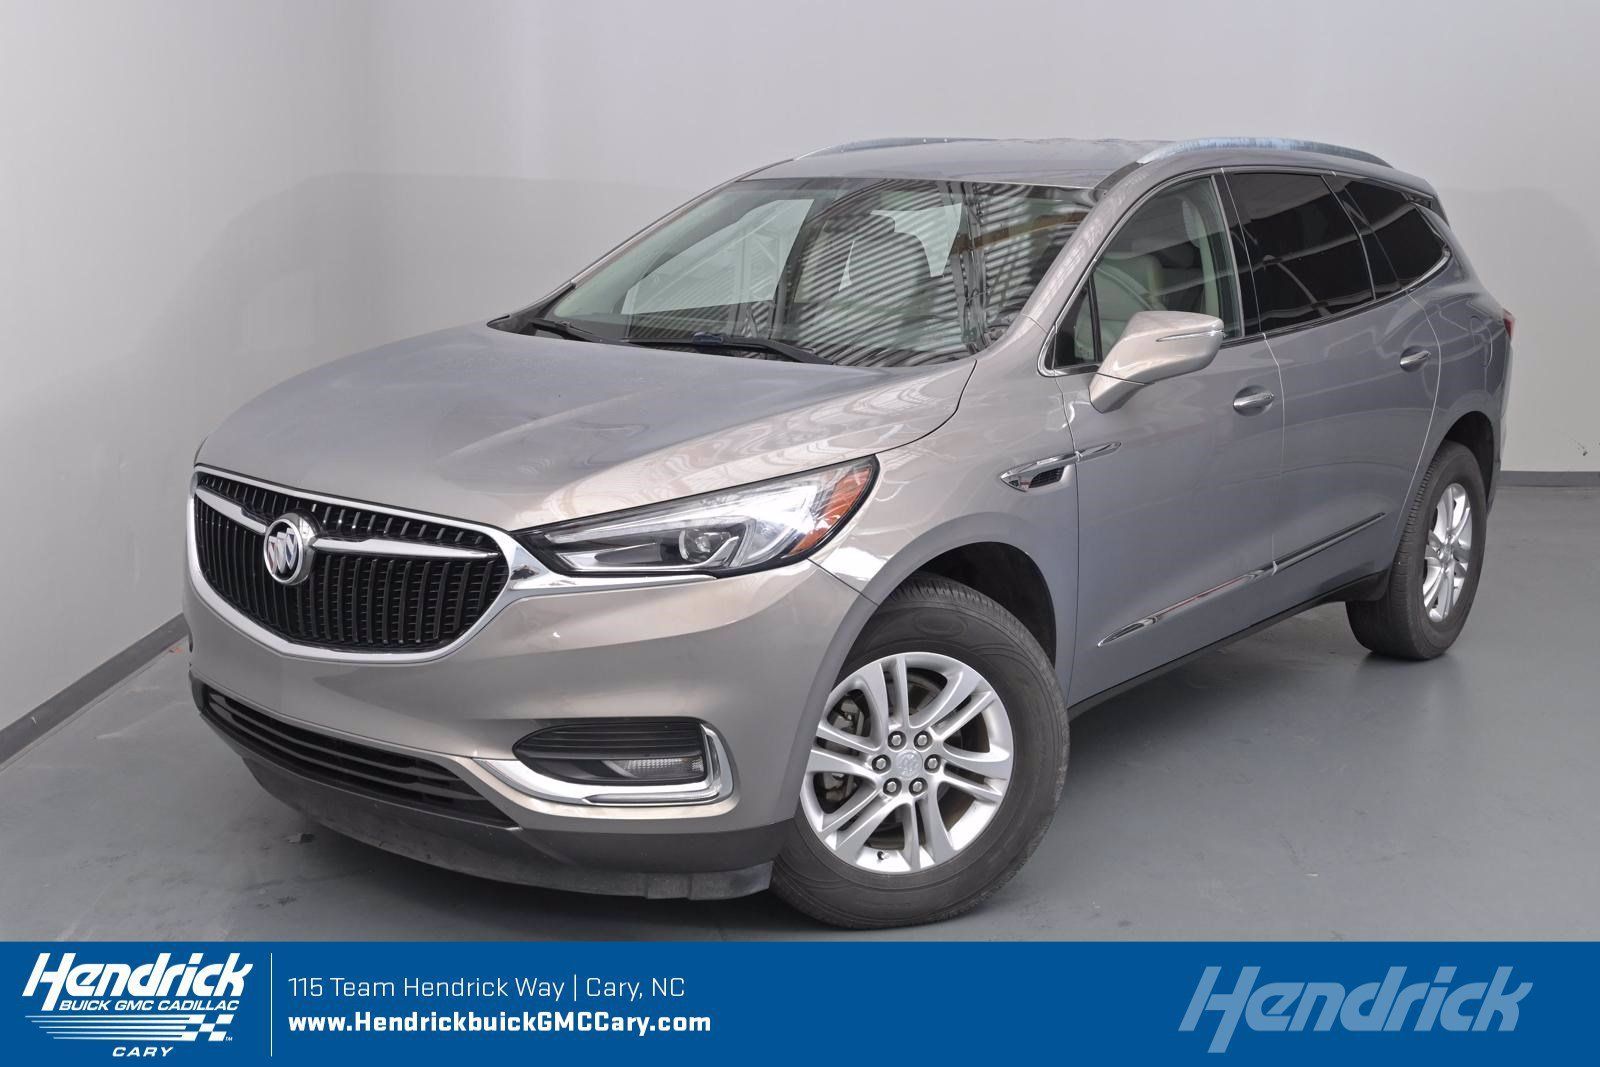 Used 2018 Buick Enclave